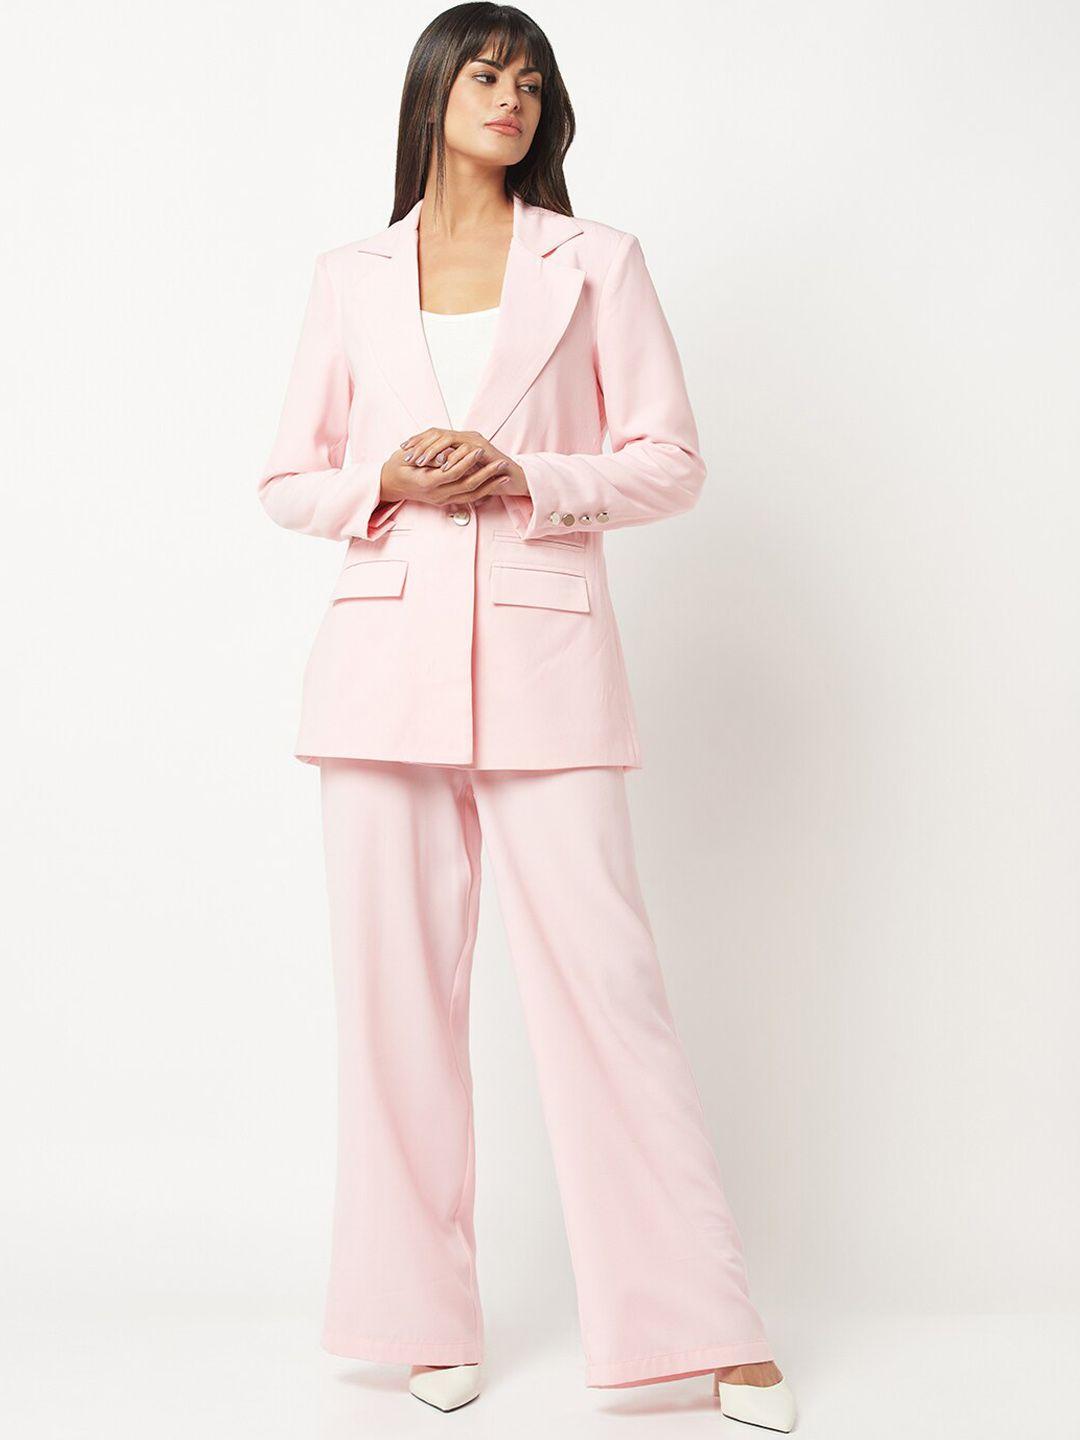 house of s lapel collar long sleeves blazer with trousers co-ord set